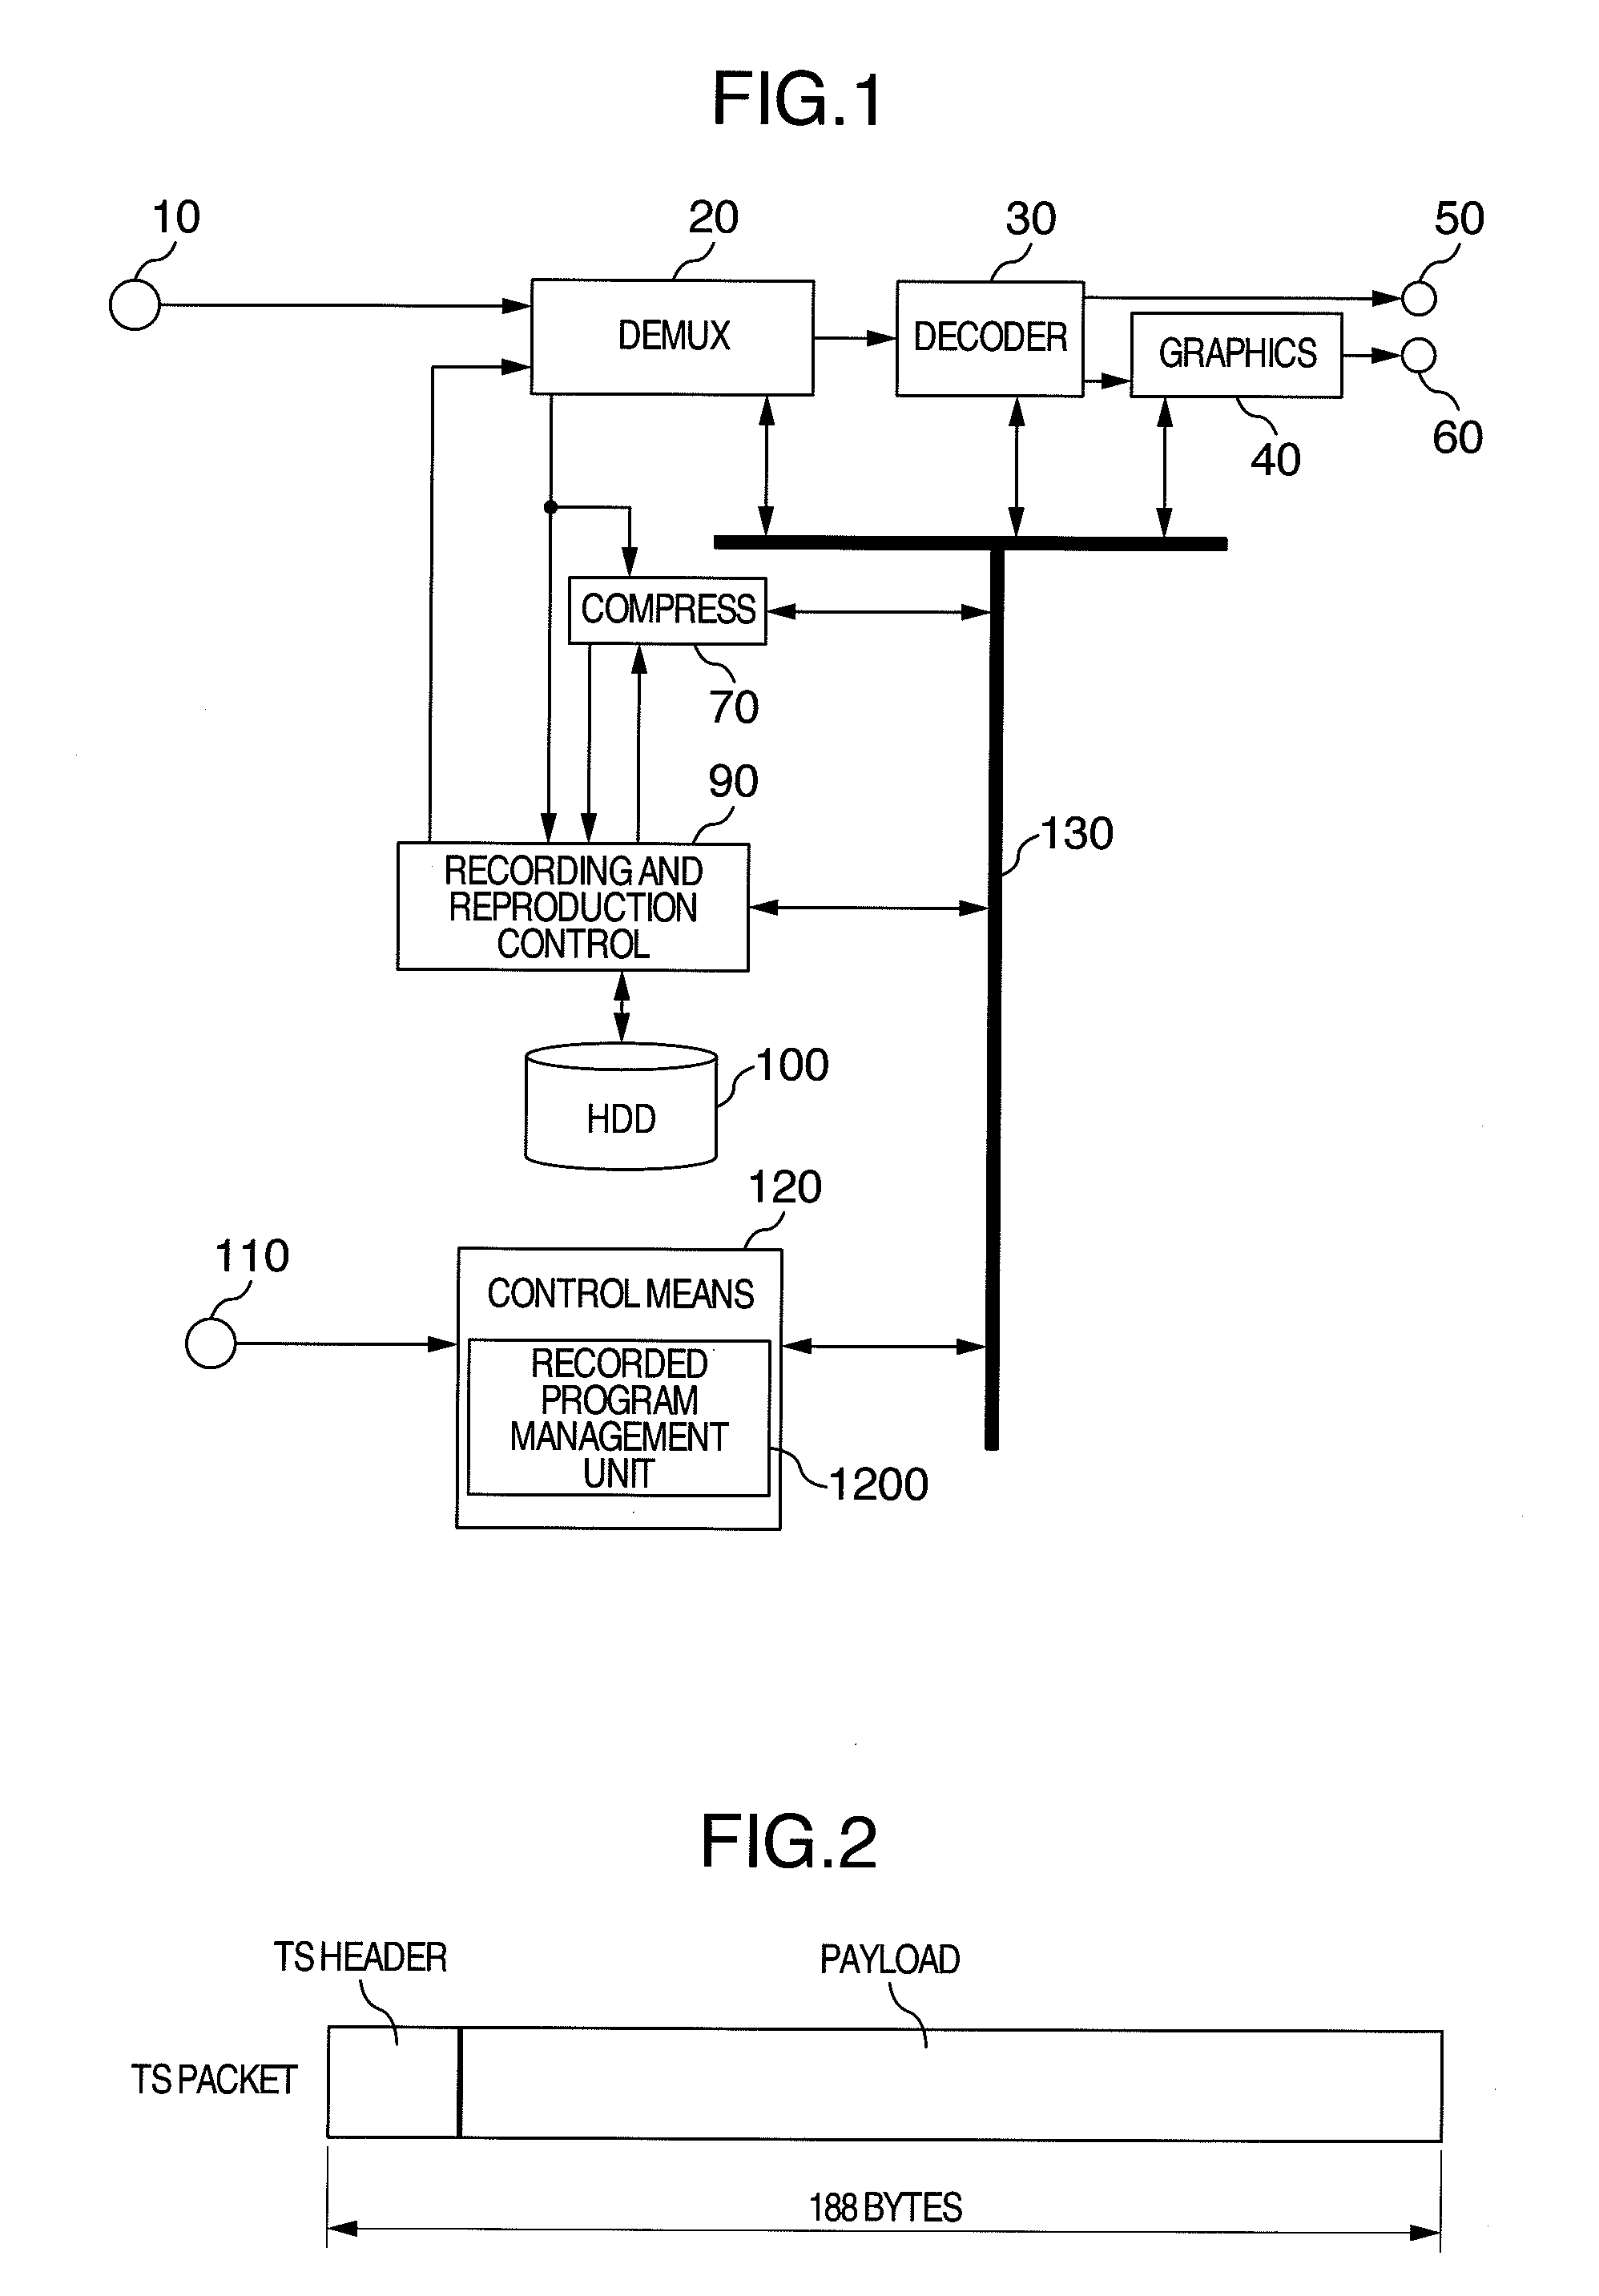 Apparatus for information processing